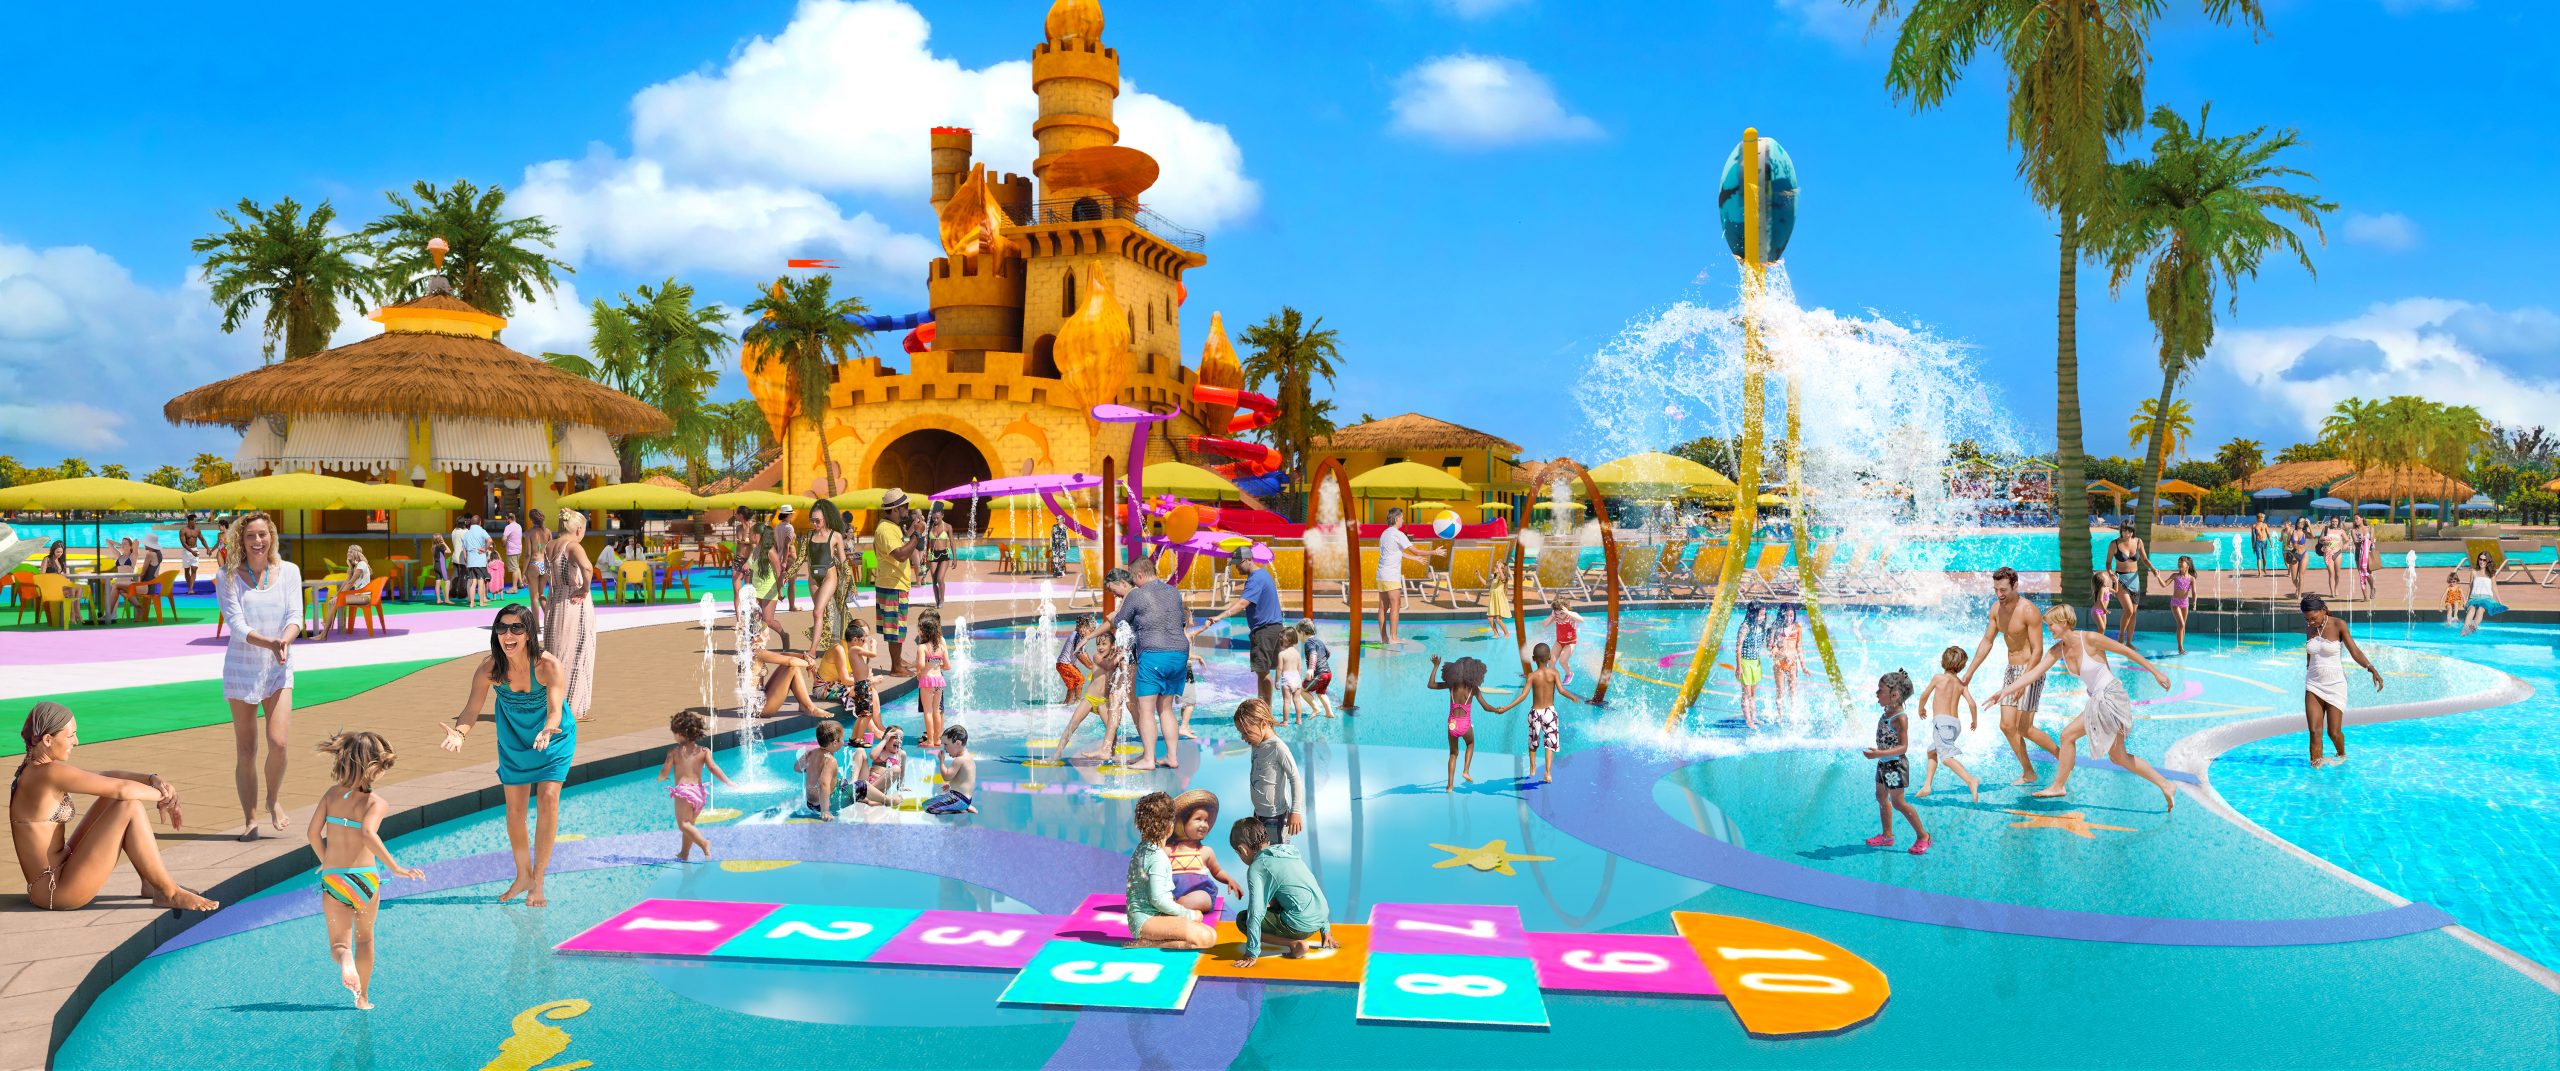 Carnival Cruise Line Shares Plans for Family Fun at Celebration Key with Reveal of Starfish Lagoon